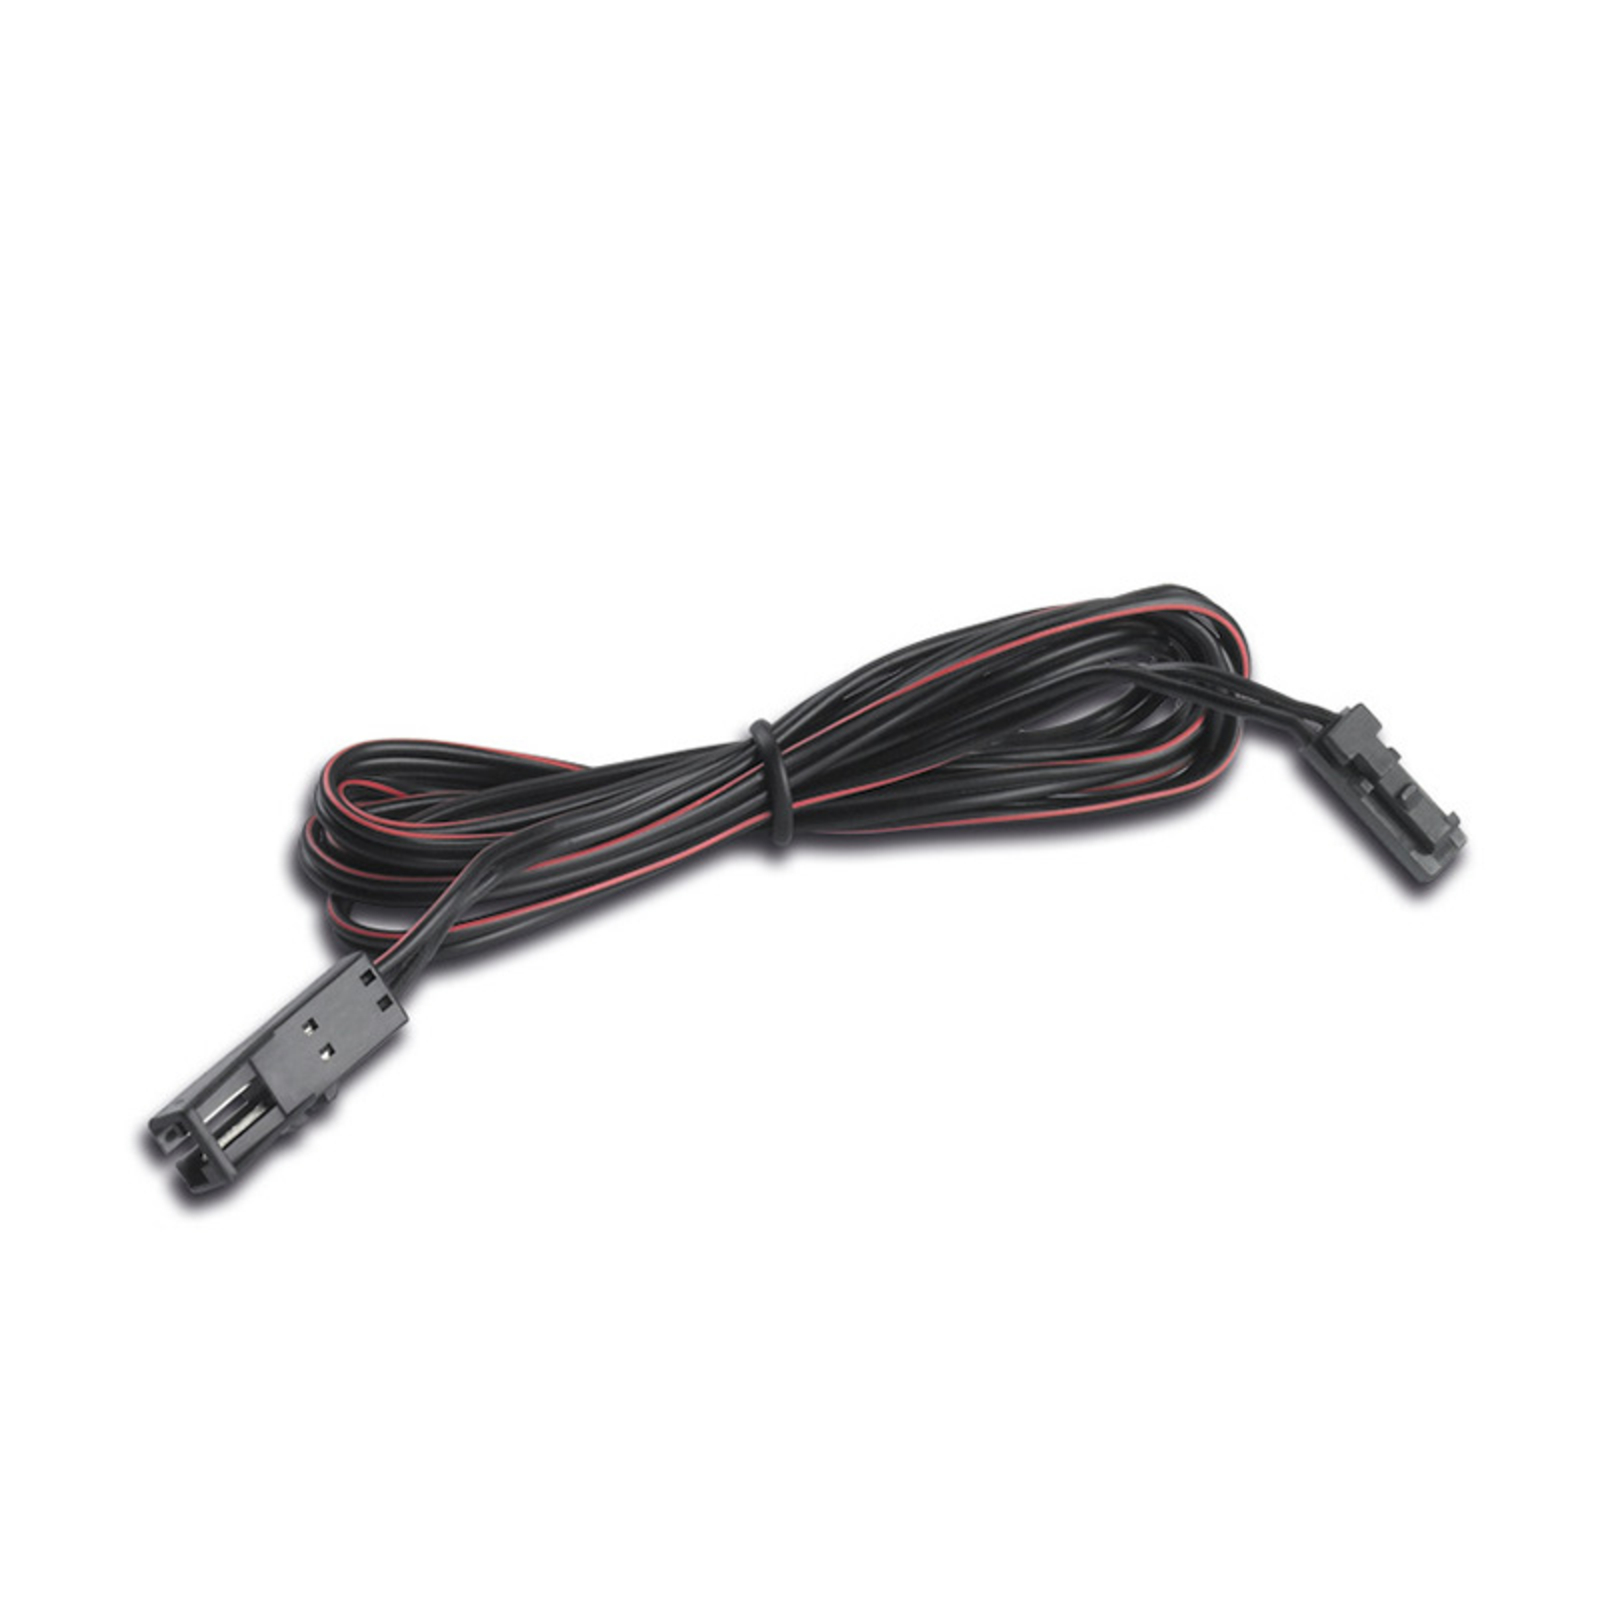 LED 350 connection cable, 1 m